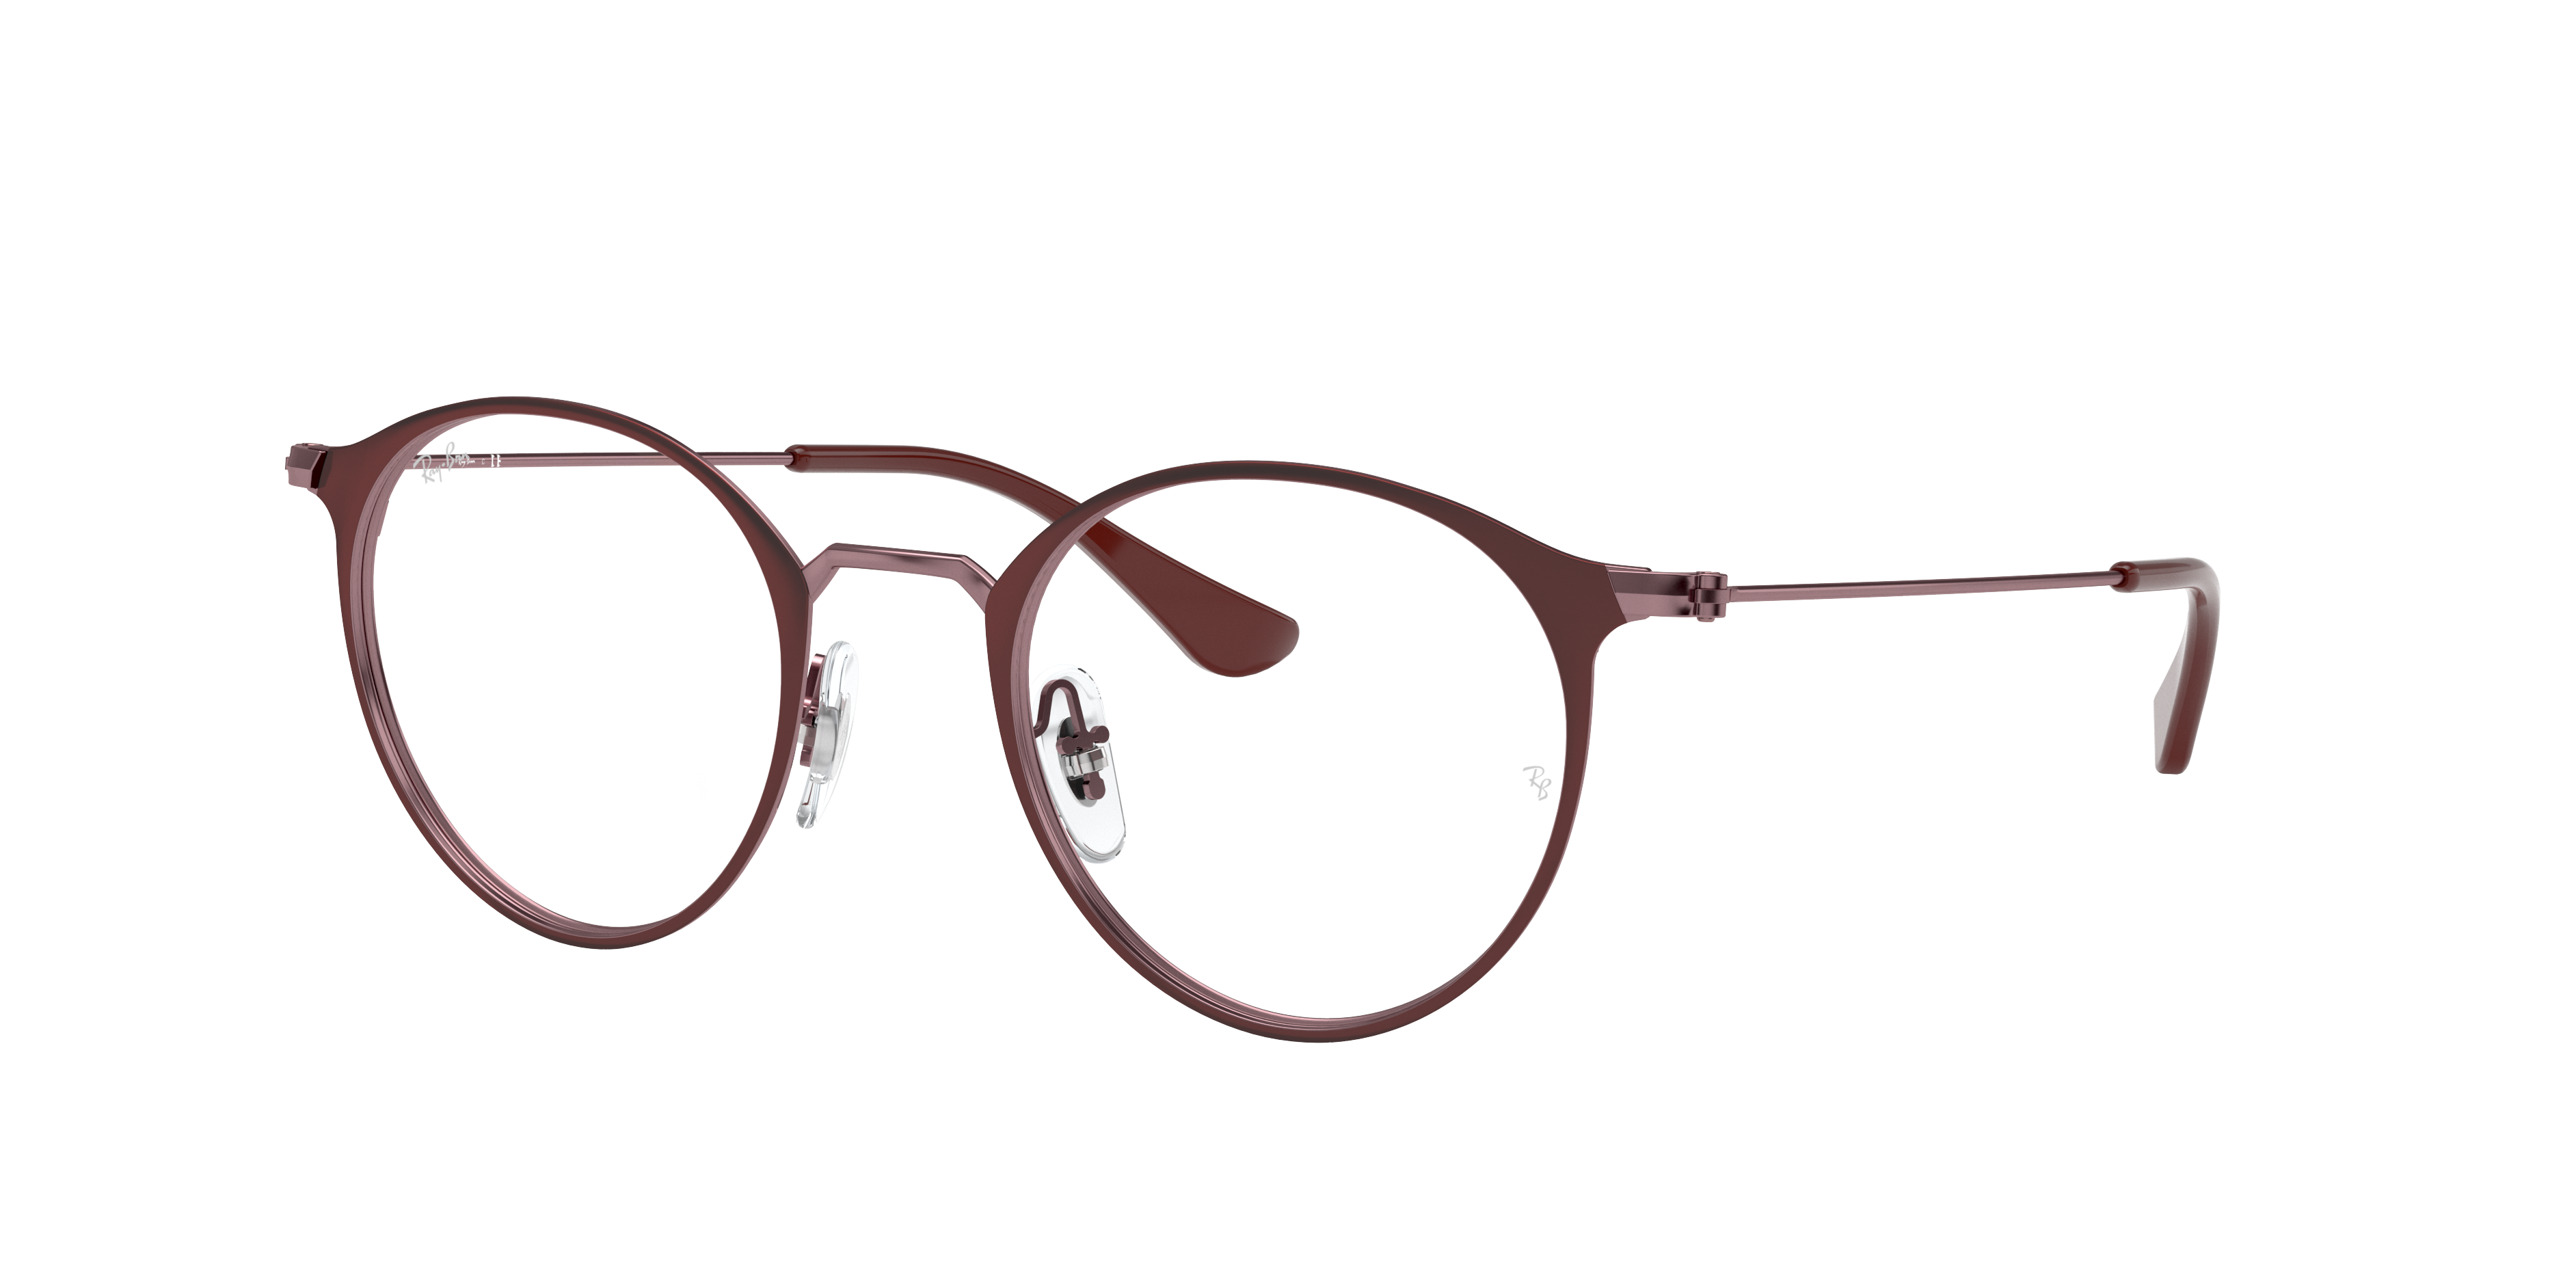 settlement dynasty Middle Ray-Ban prescription glasses RB6378 Bordeaux - Metal - 0RX6378307047 | Ray- Ban® USA